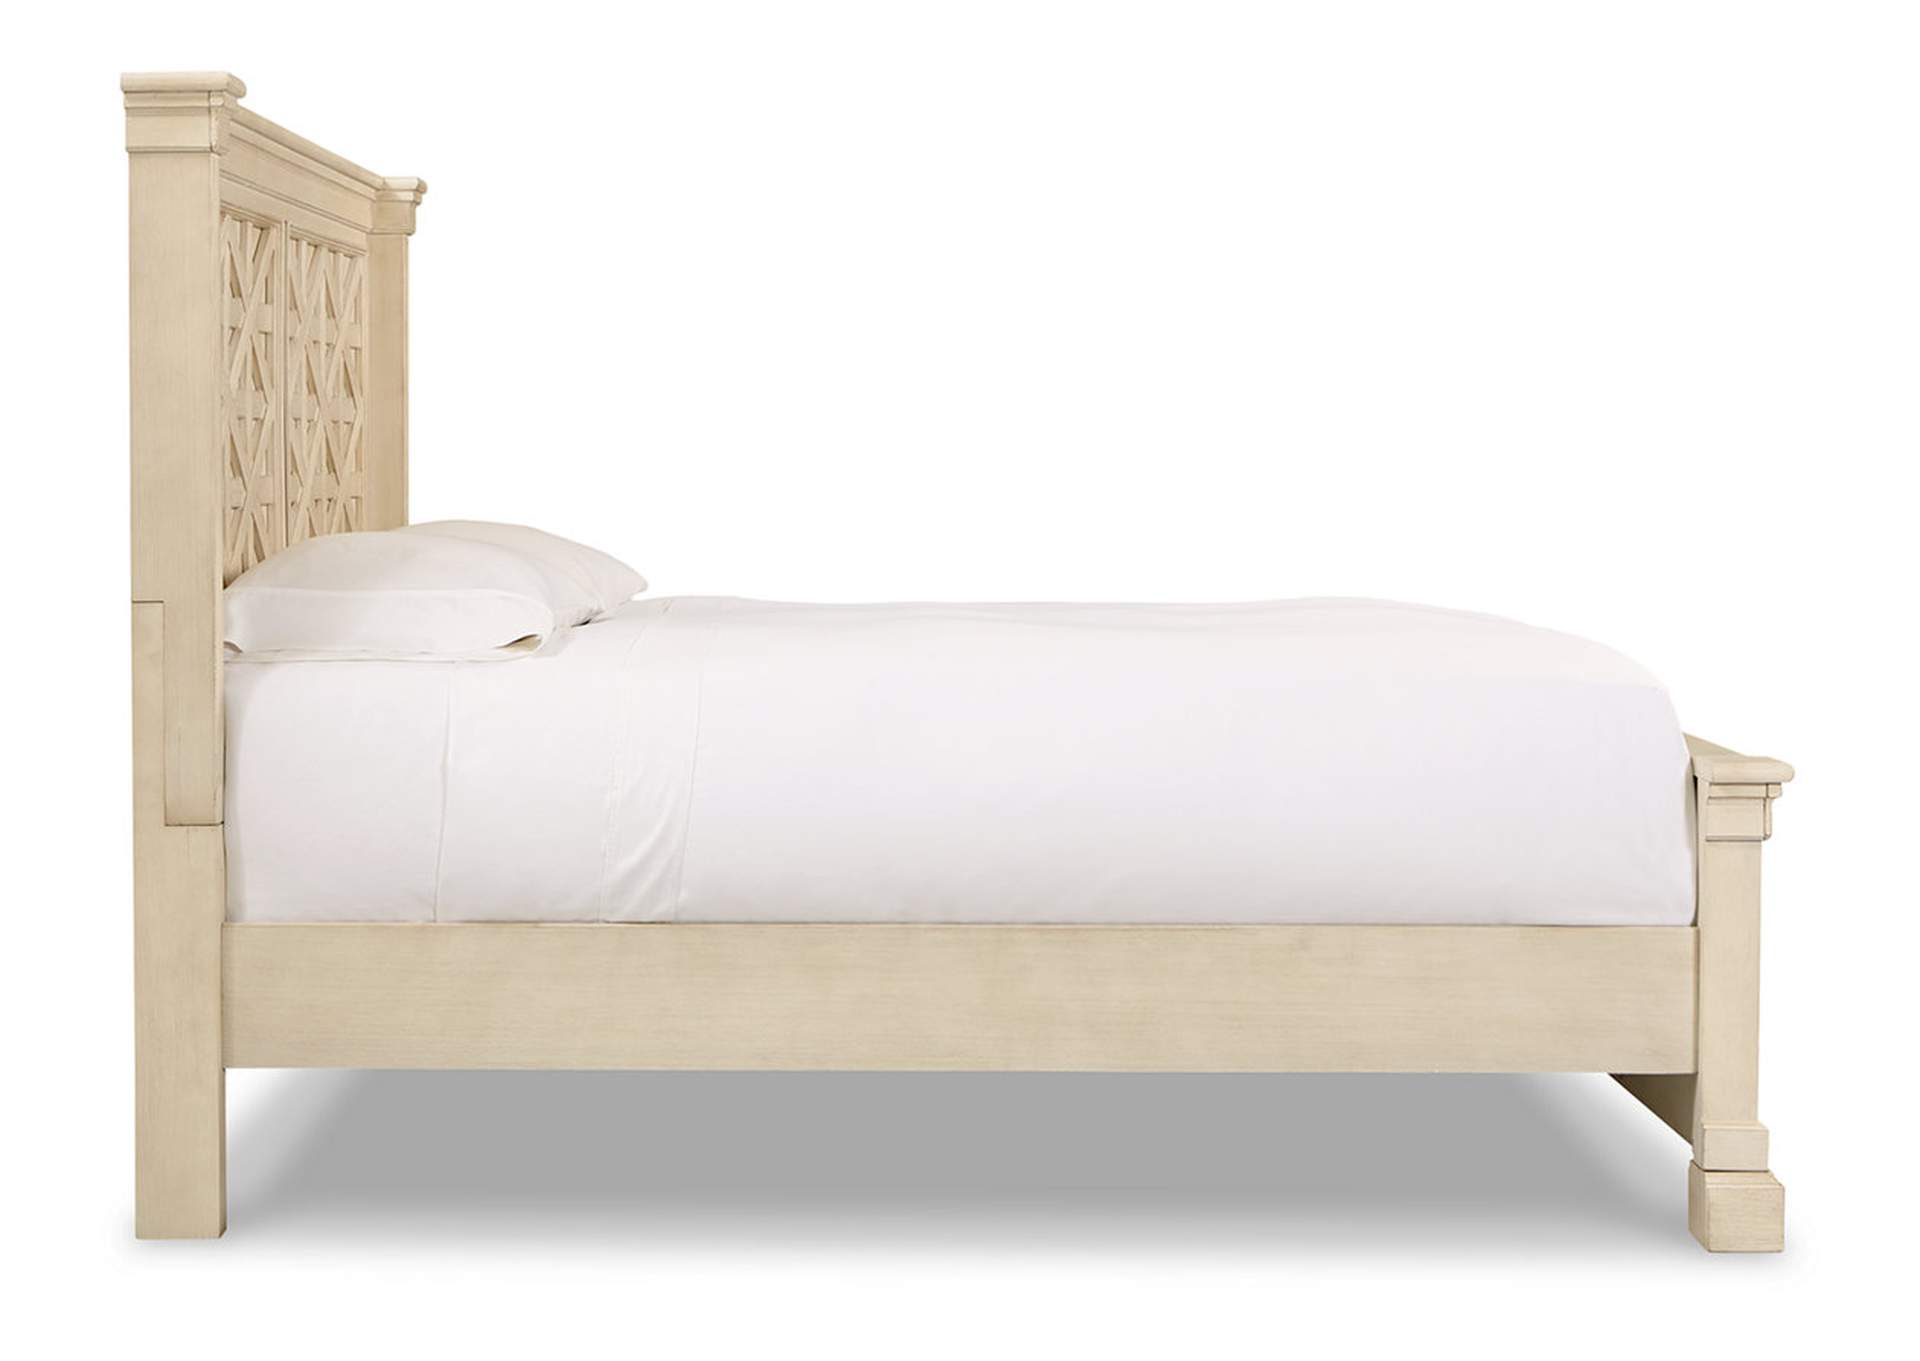 Bolanburg Queen Panel Bed,Signature Design By Ashley